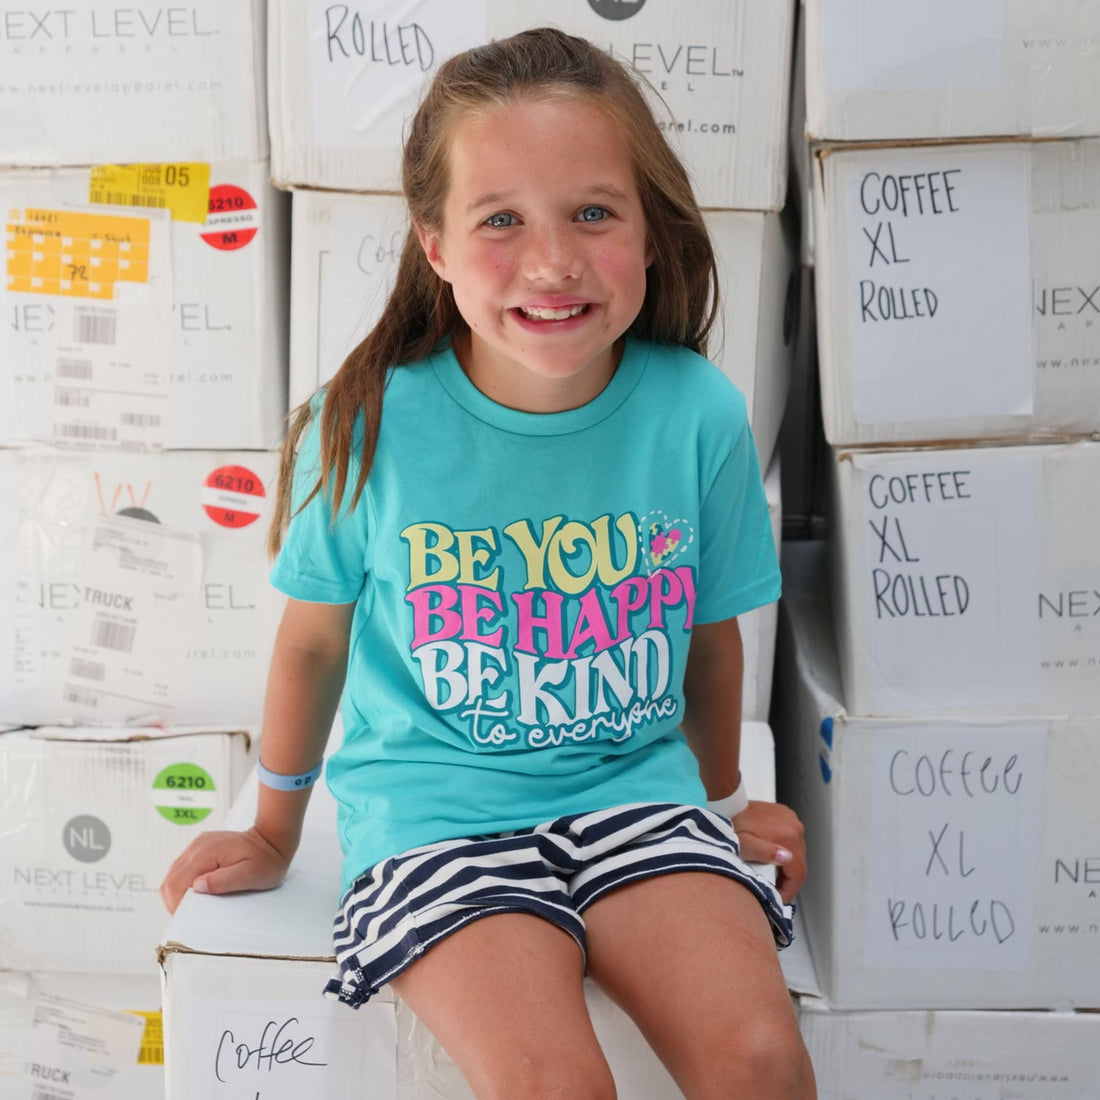 Be You, Be Happy, Be Kind to Everyone® in this super cute aqua youth tee! 